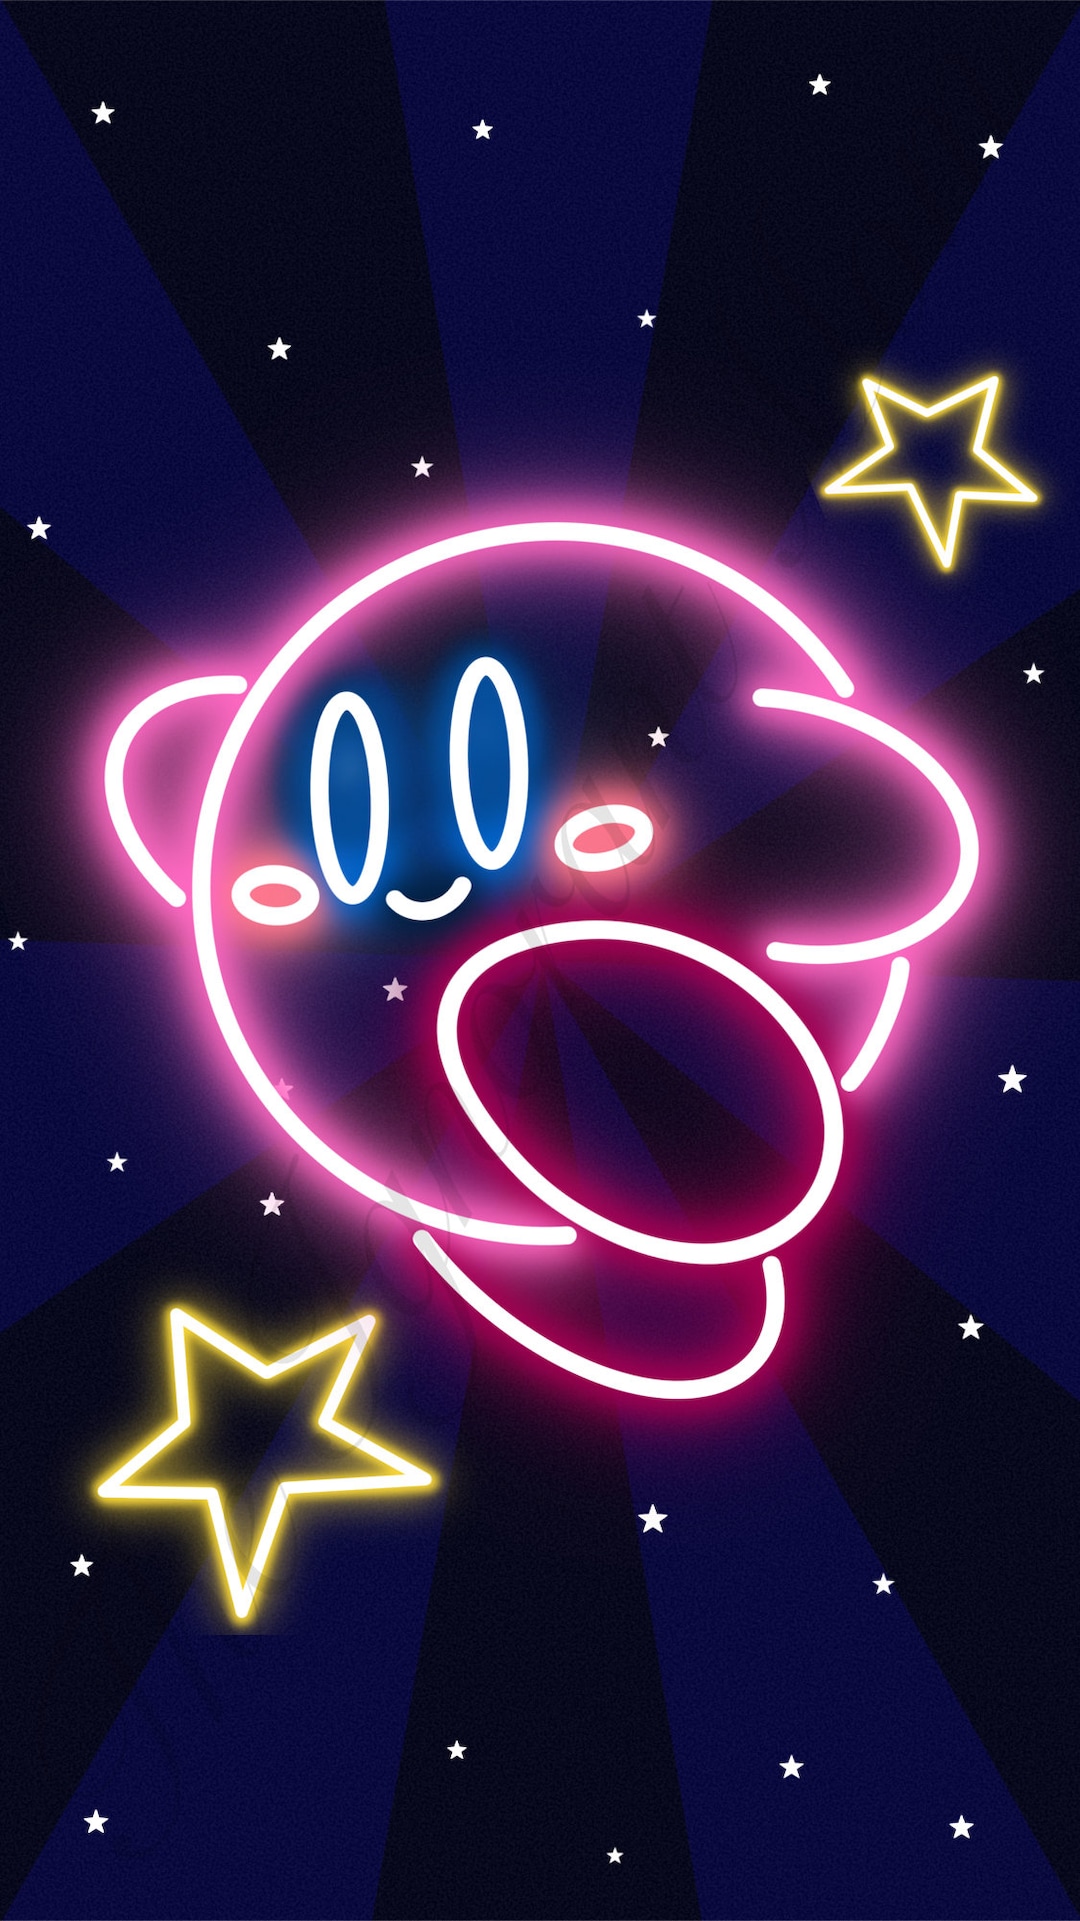 Neon Light Kirby iPhone Android Wallpaper Digital Download